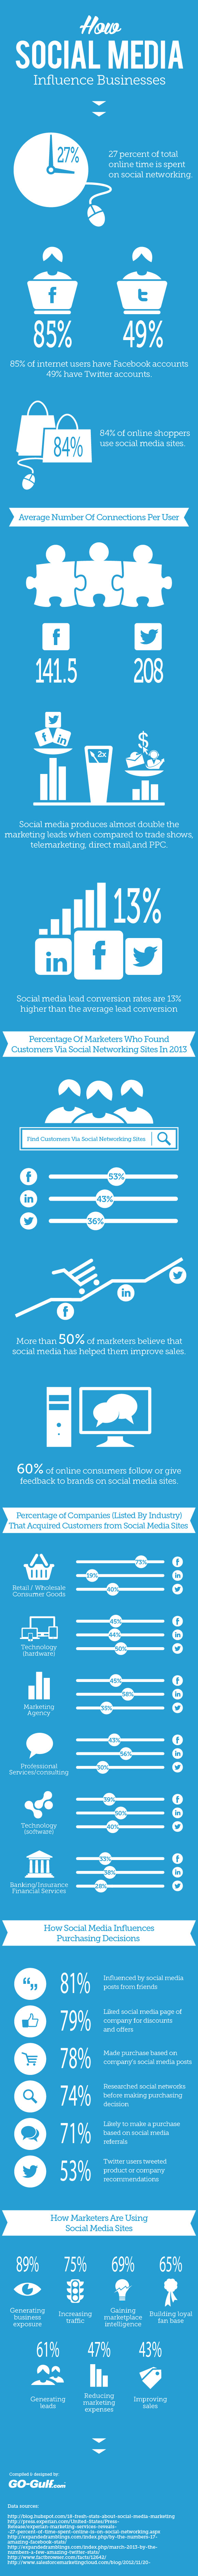 how-social-media-influence-businesses-infographic_51dbd2db20a64